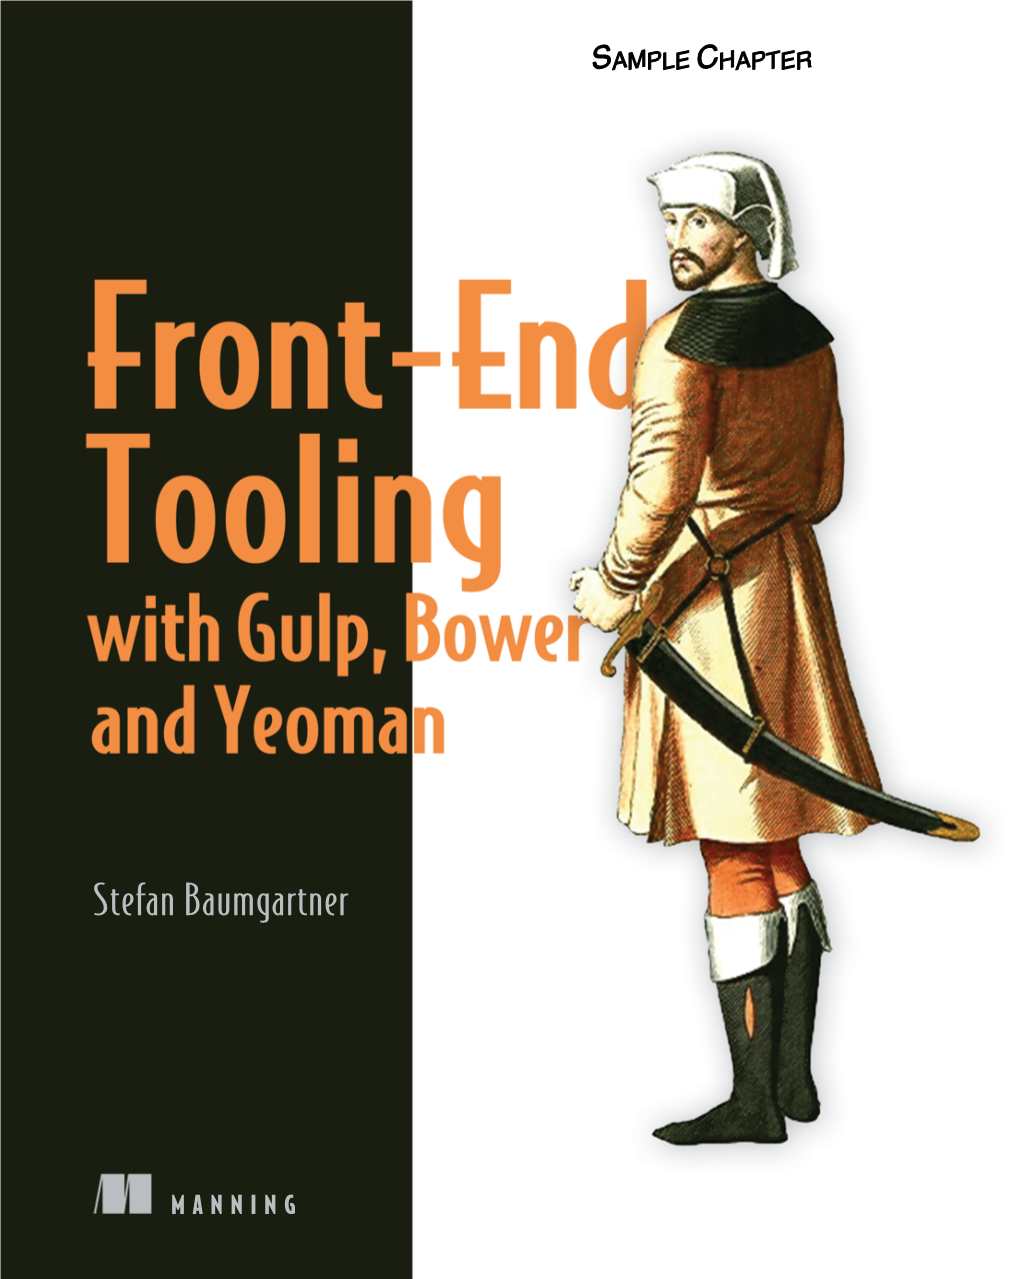 Front-End Tooling with Gulp, Bower, and Yeoman Teaches You This Book Completes the How to Set up an Automated Development Workﬂ Ow